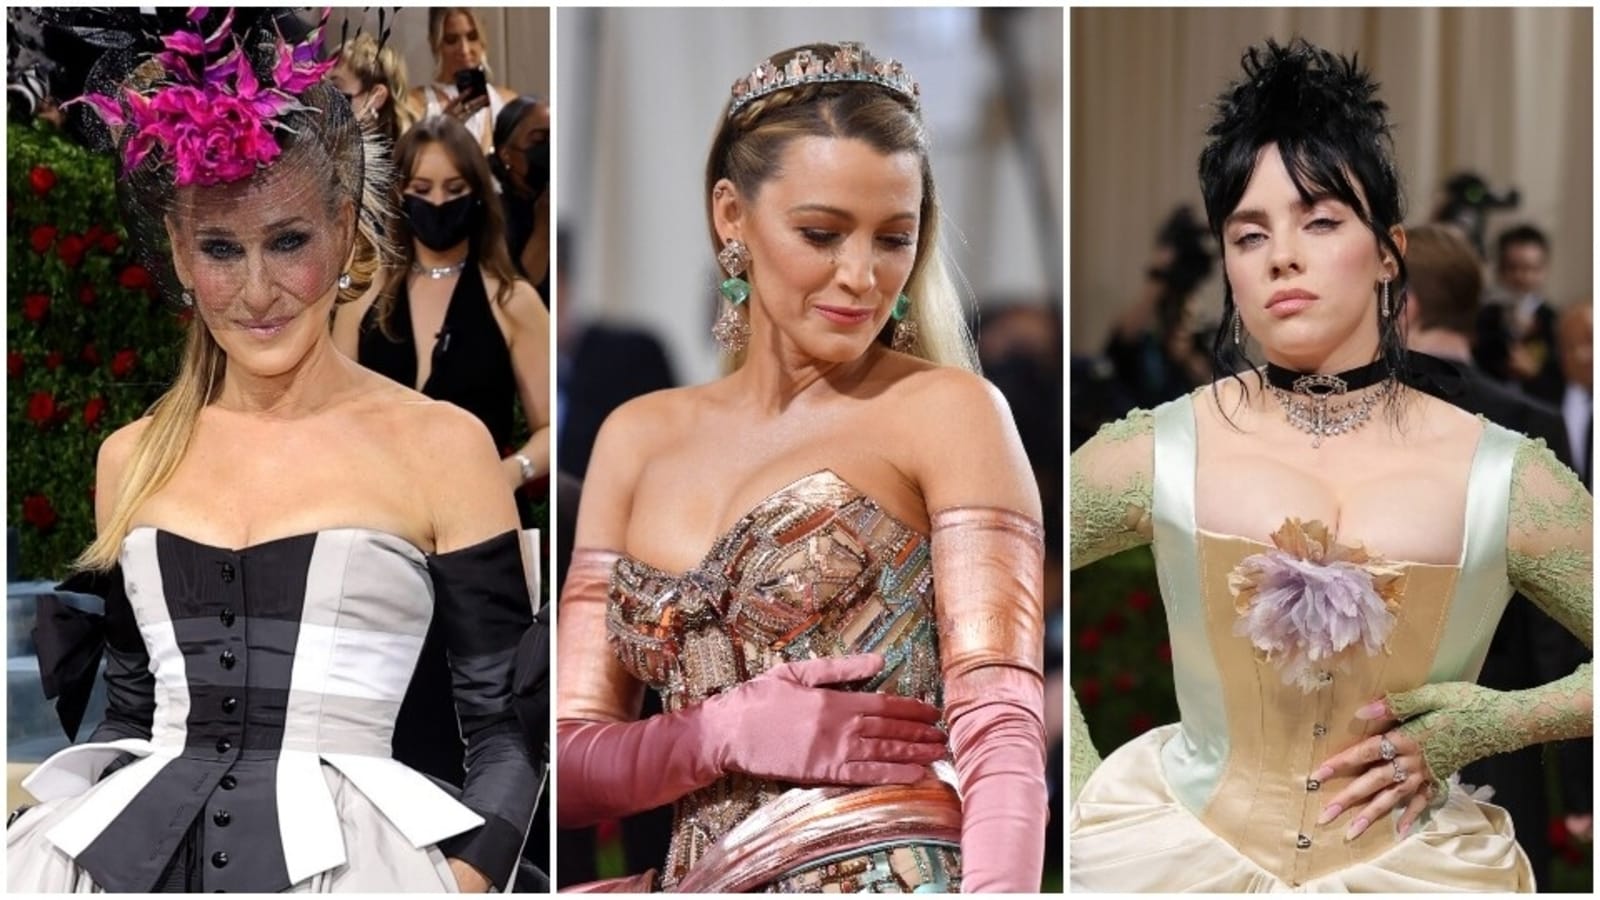 Sarah Jessica Parker, Blake Lively to Billie Eilish, what inspired the best-dressed Met Gala 2022 looks